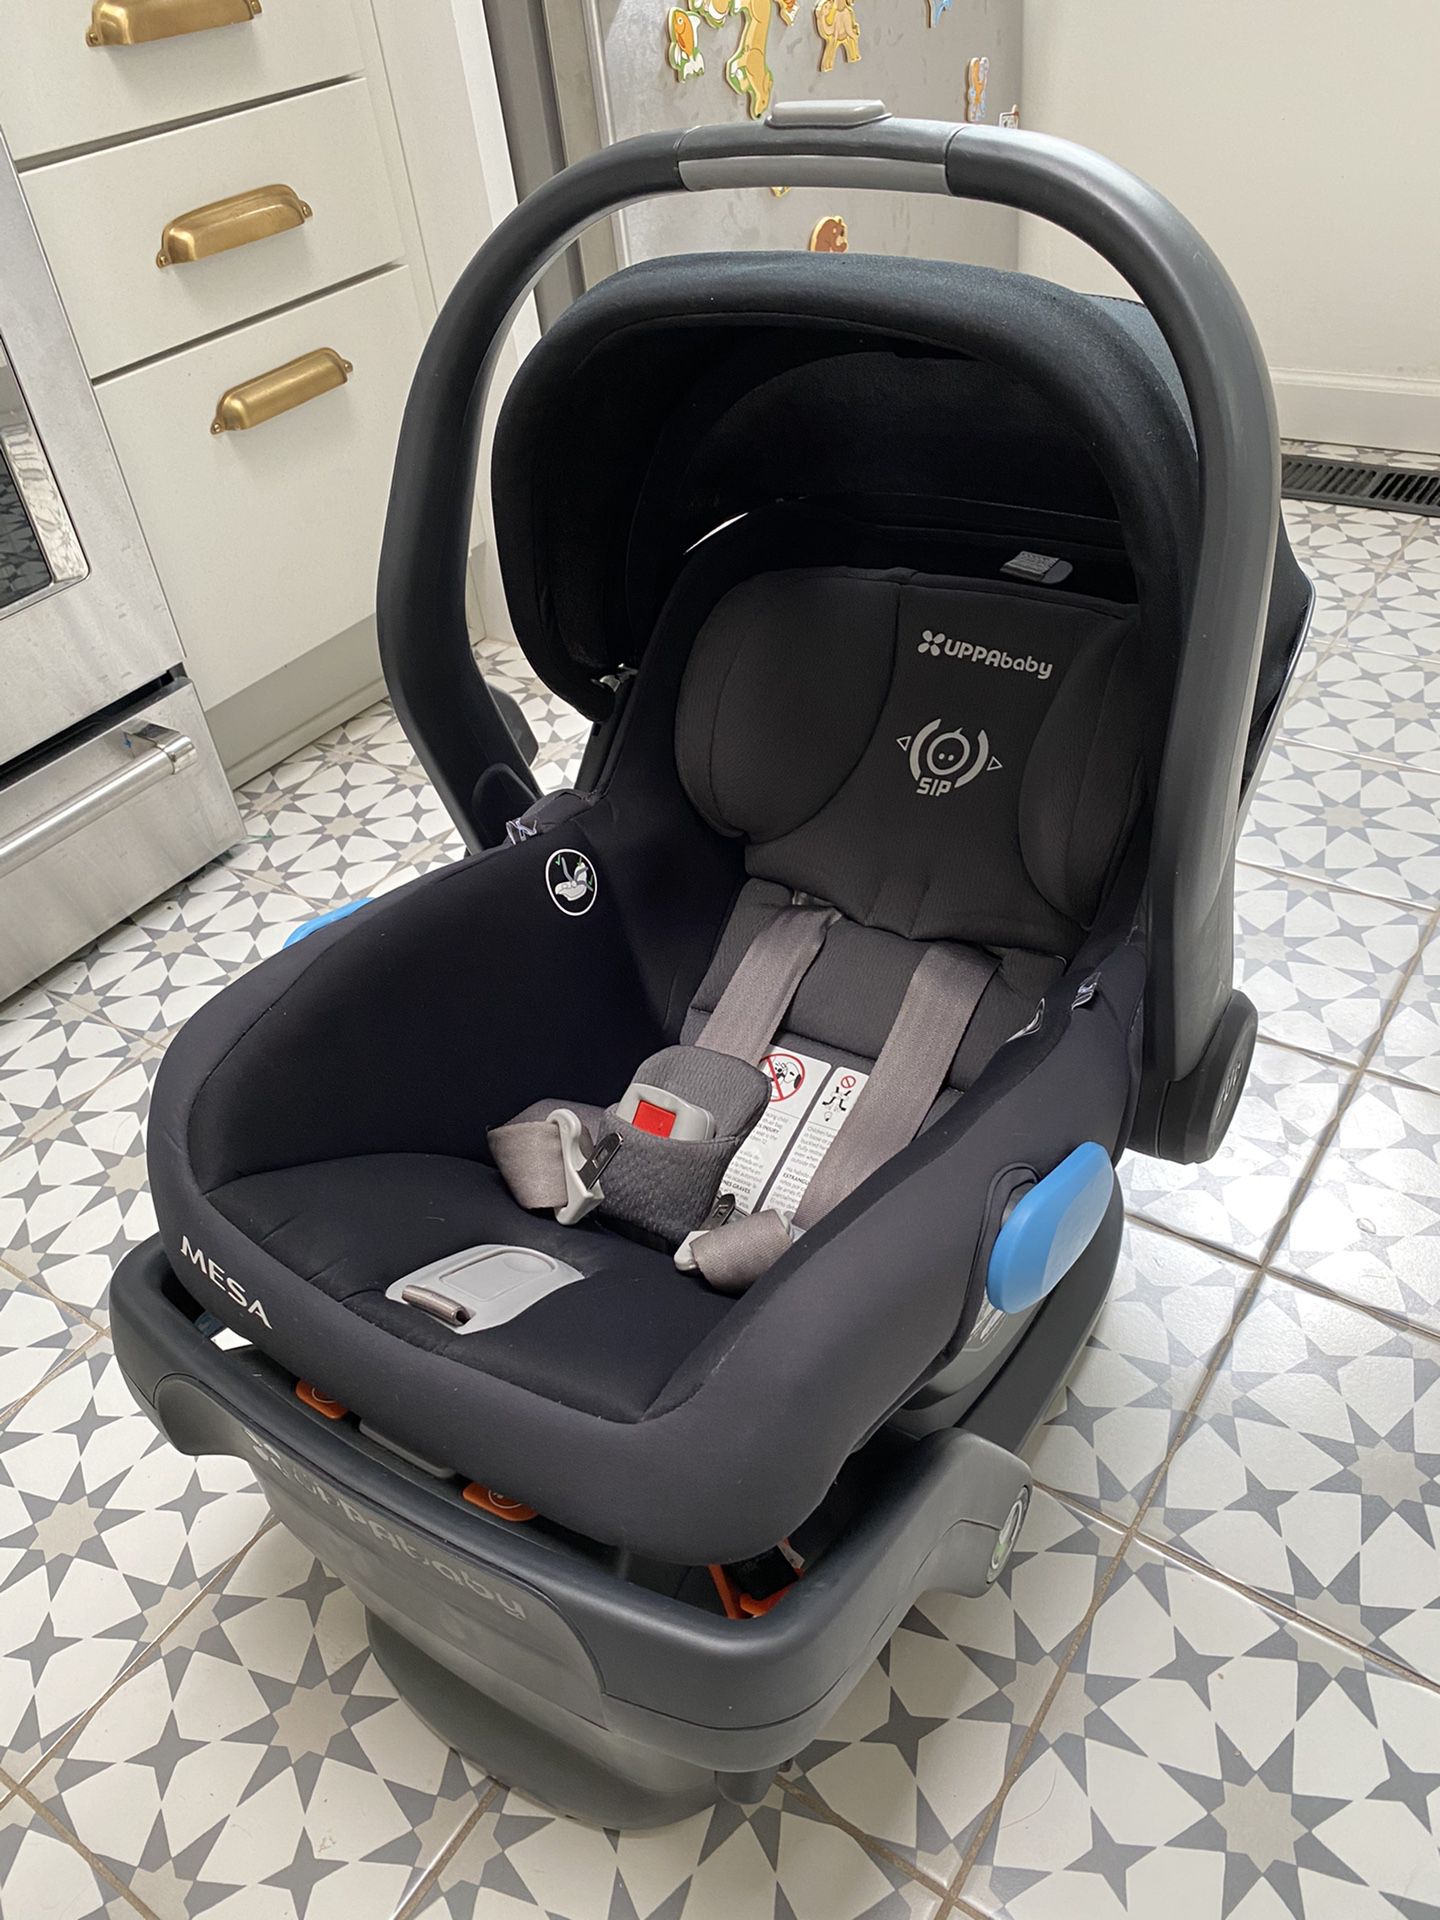 Uppababy Mesa infant car seat + two bases